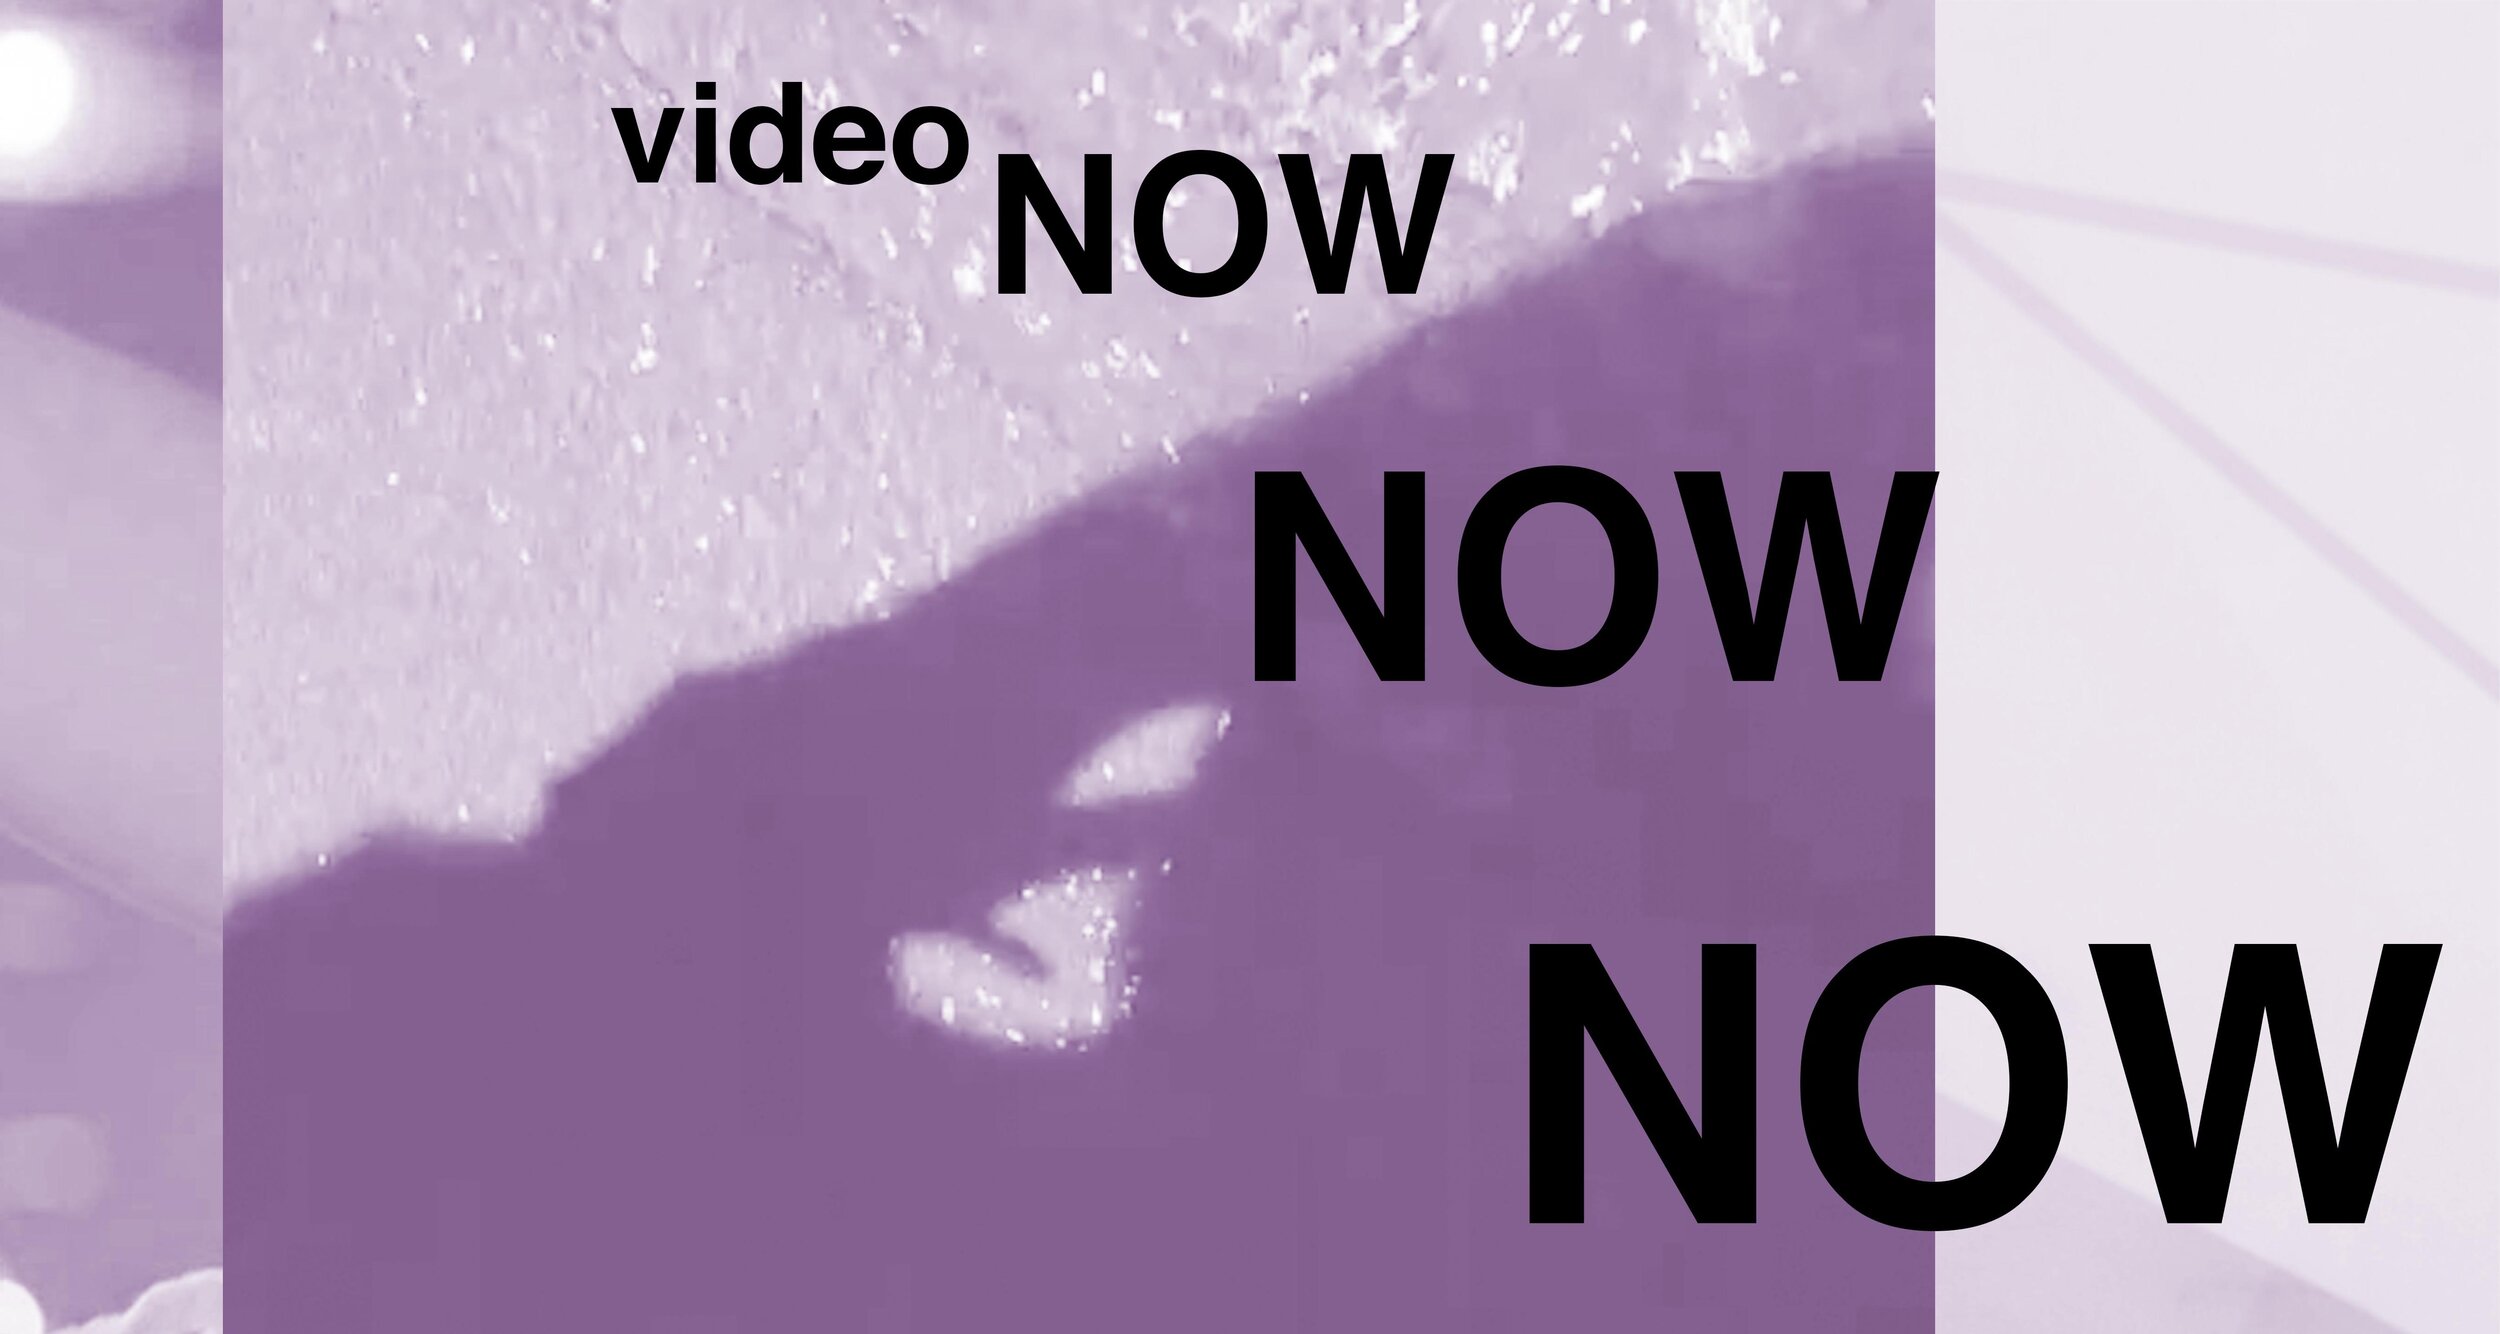 Video Now Now Now